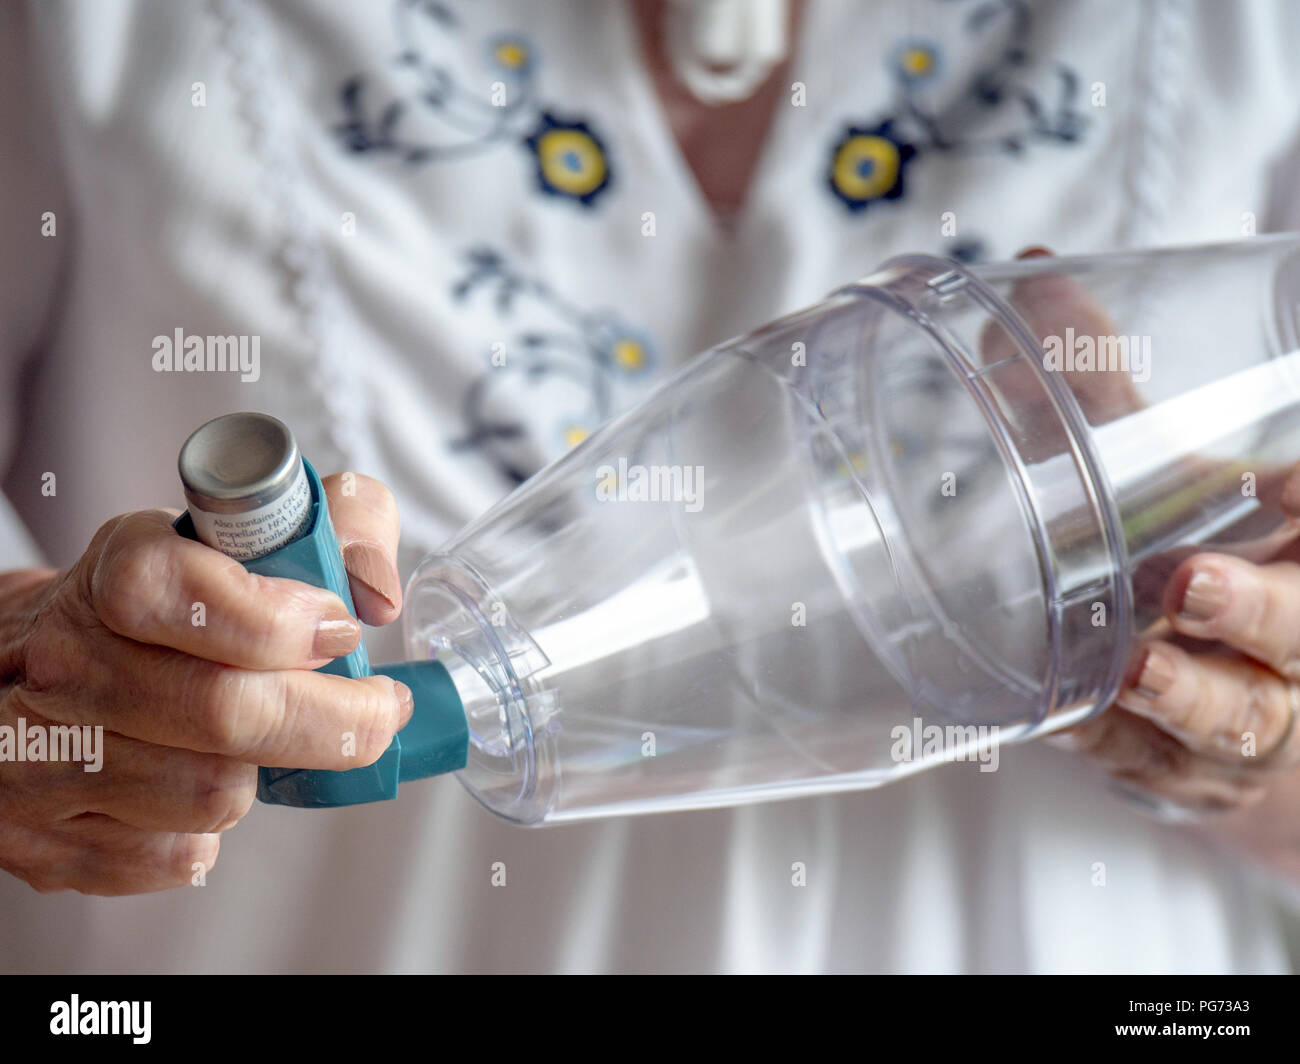 Fitting an asthma inhaler onto a spacer device Stock Photo